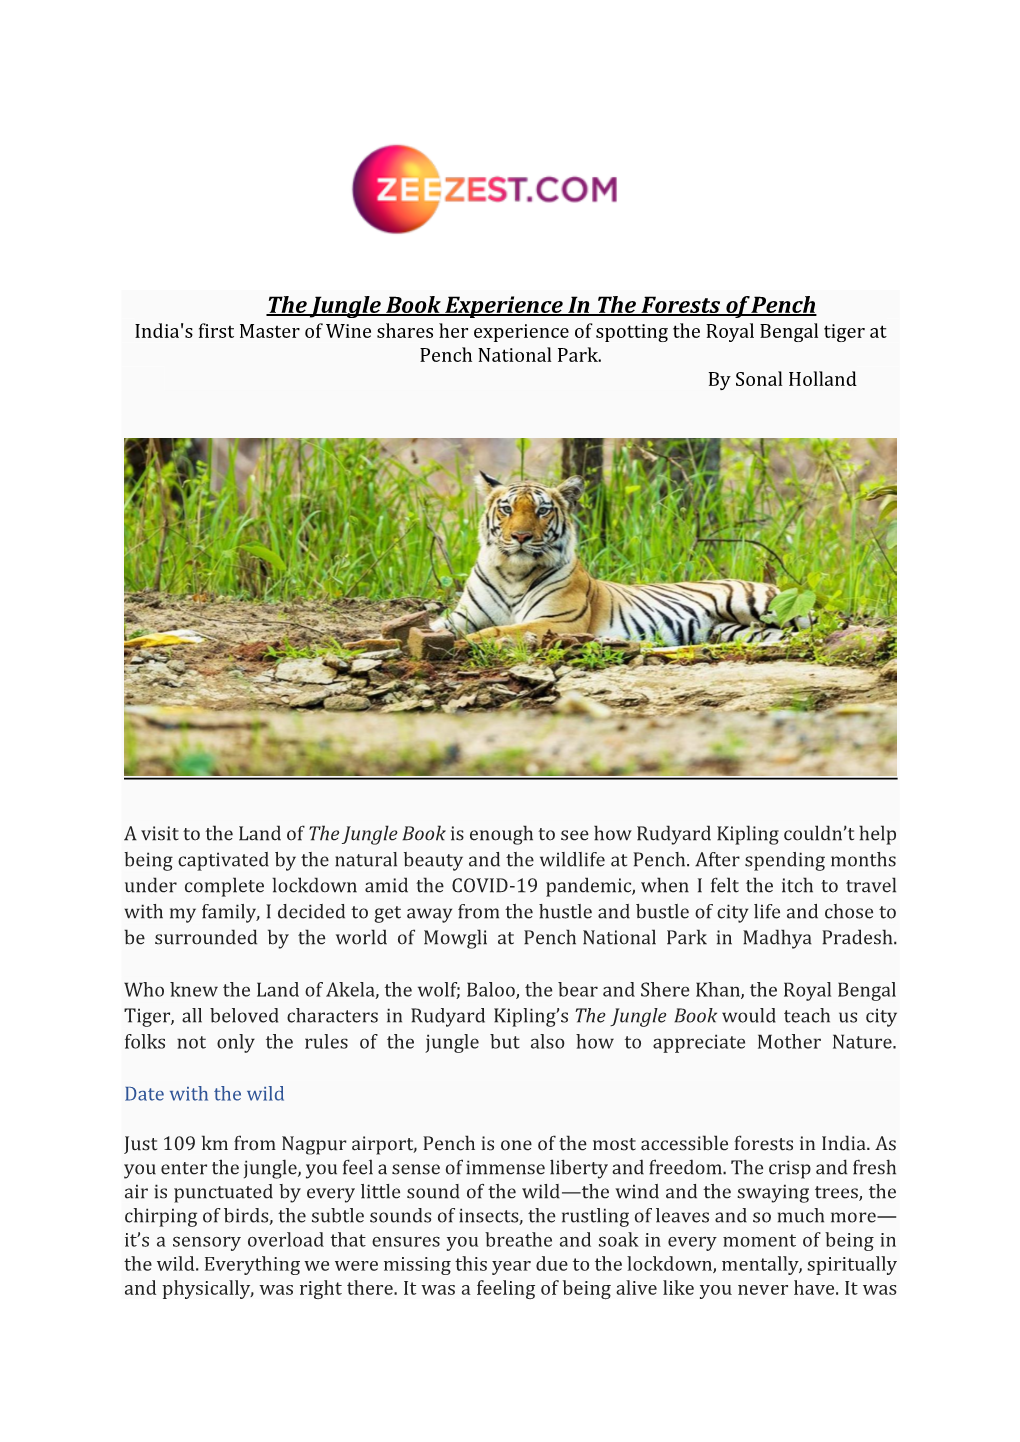 The Jungle Book Experience in the Forests of Pench India's First Master of Wine Shares Her Experience of Spotting the Royal Bengal Tiger at Pench National Park